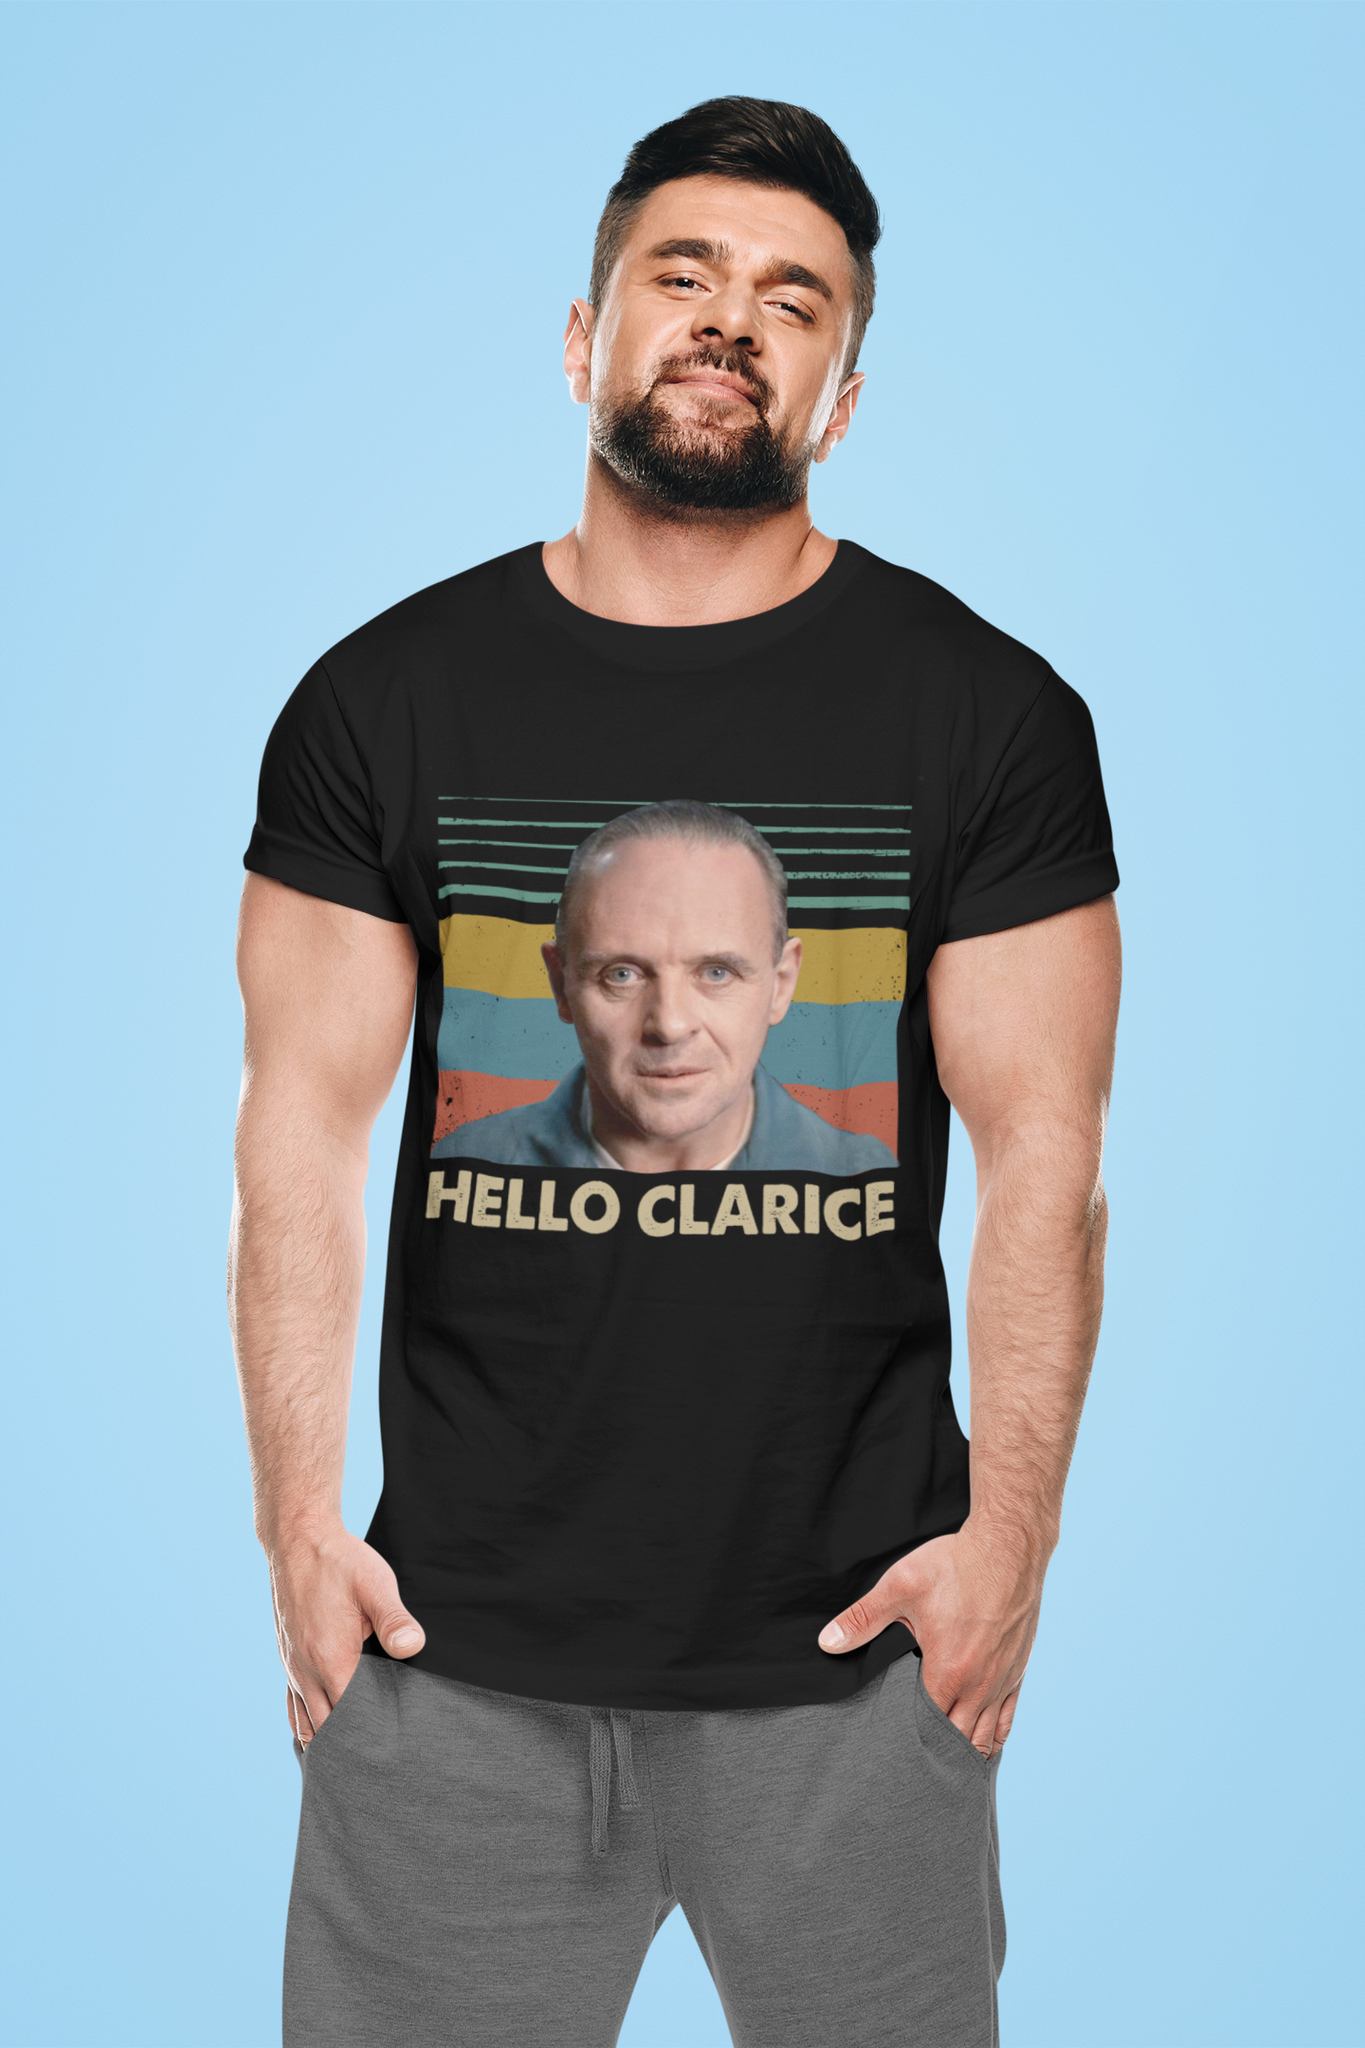 Silence Of The Lamb Vintage T Shirt, Hello Clarice Tshirt, Hannibal Lecter T Shirt, Halloween Gifts